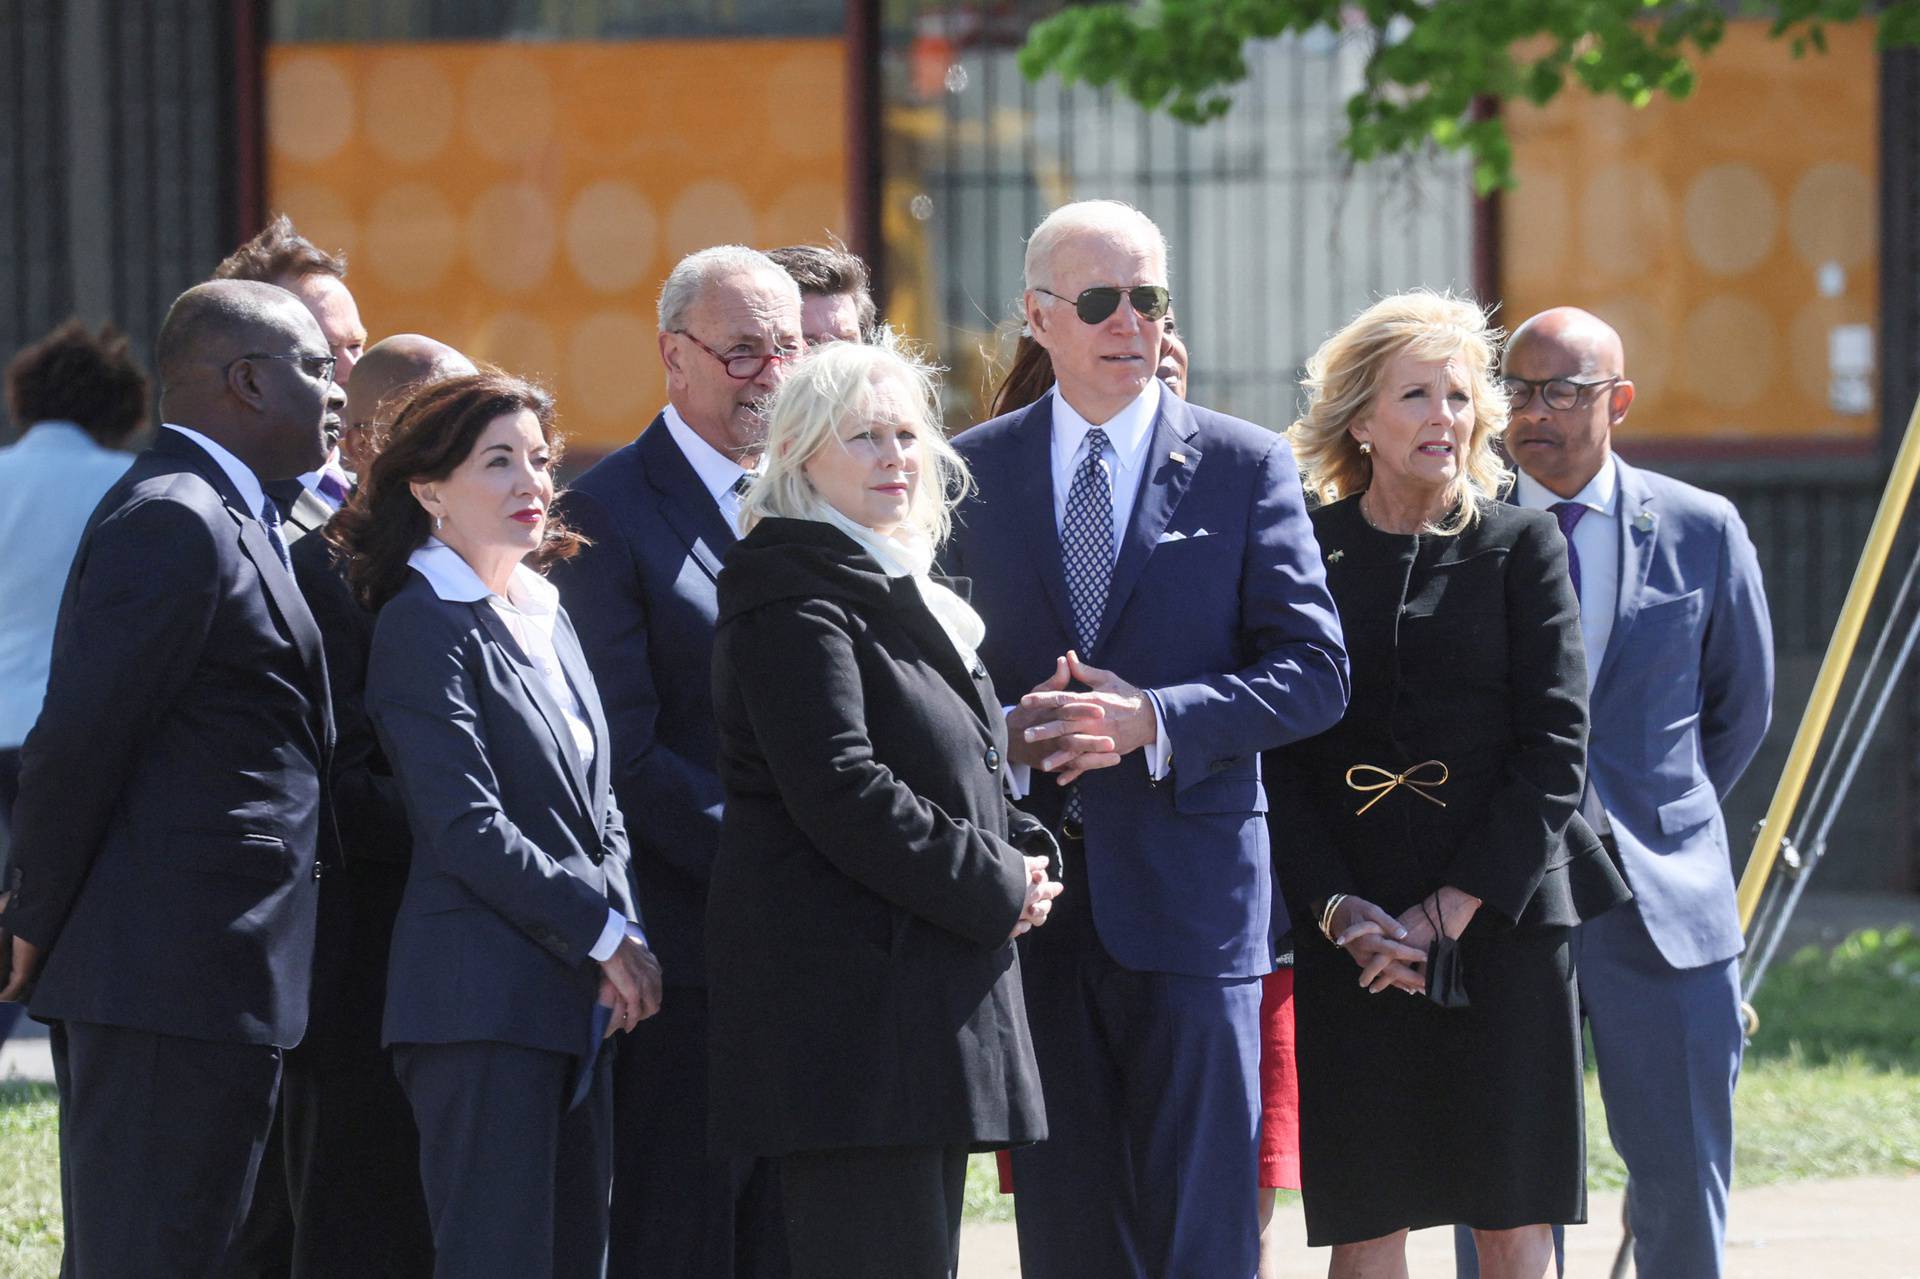 U.S. President Joe Biden and first lady Jill Biden look at a memorial in the wake of a weekend shooting at a Tops supermarket in Buffalo, New York